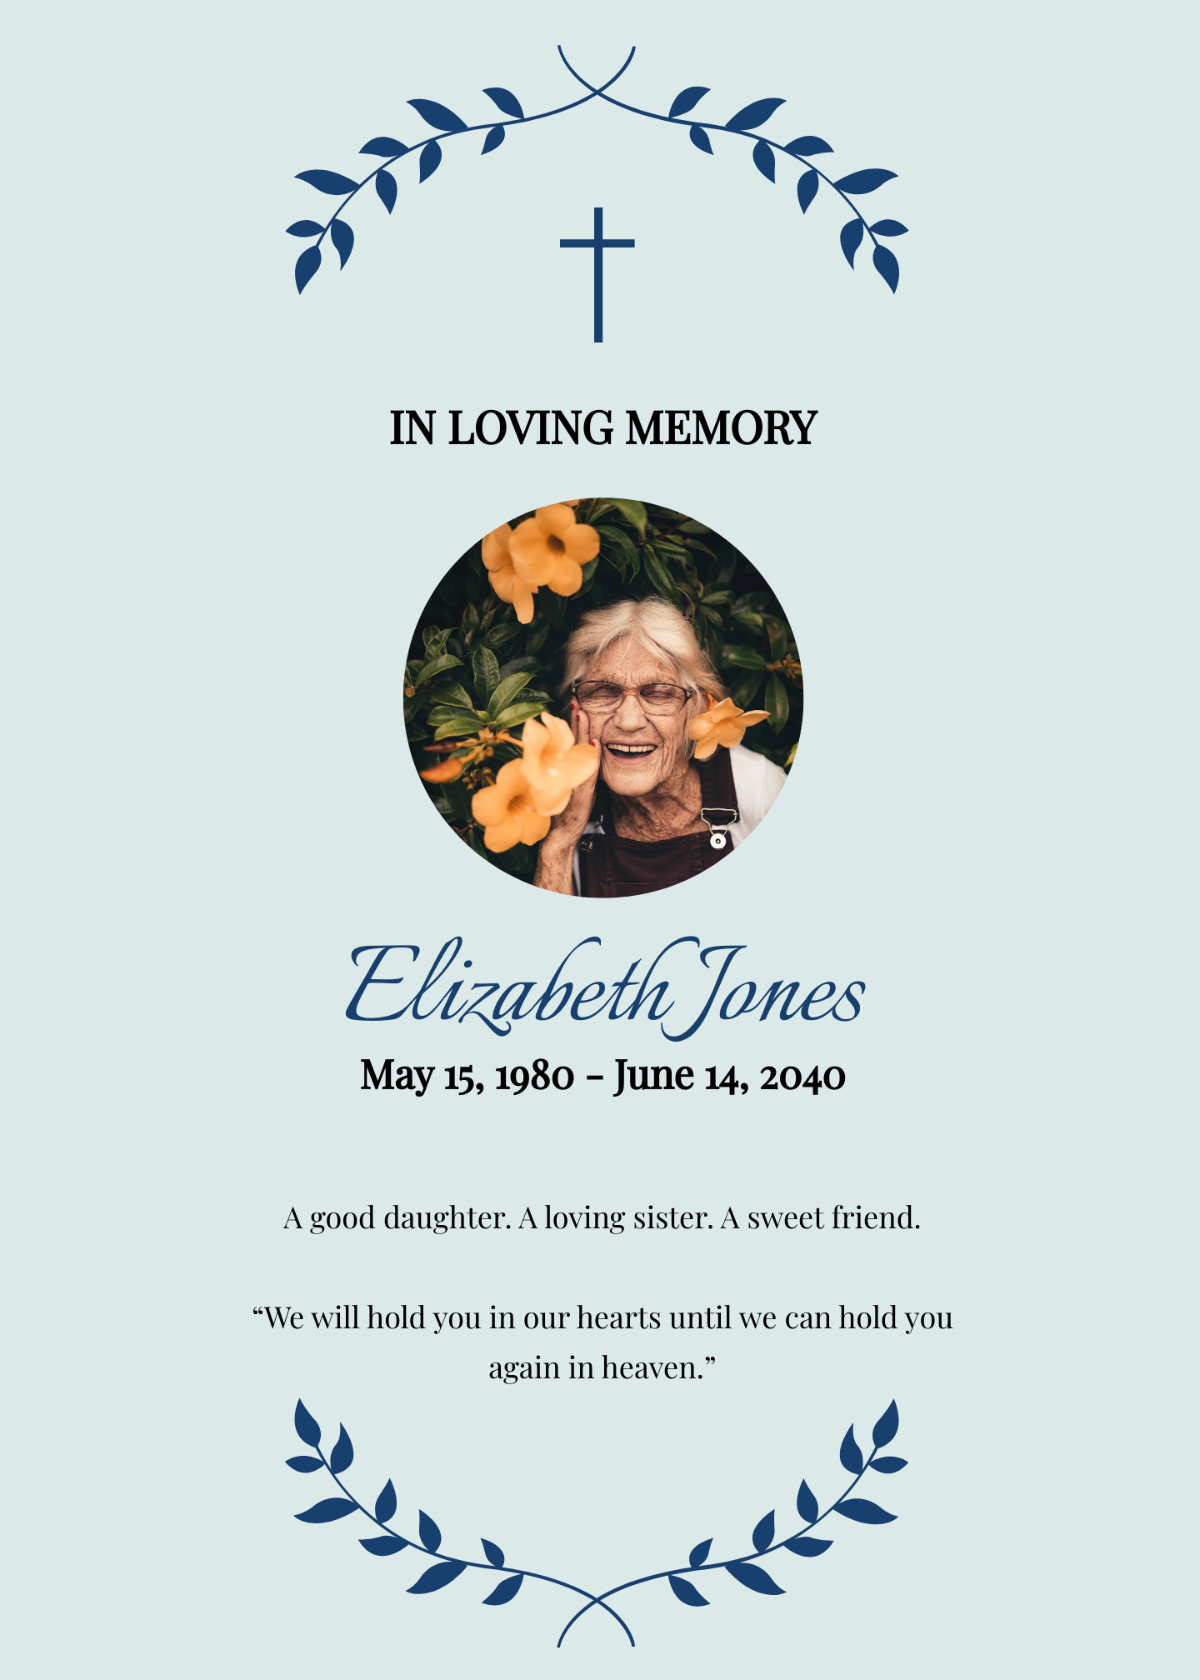 Funeral Service Remembrance Card Template